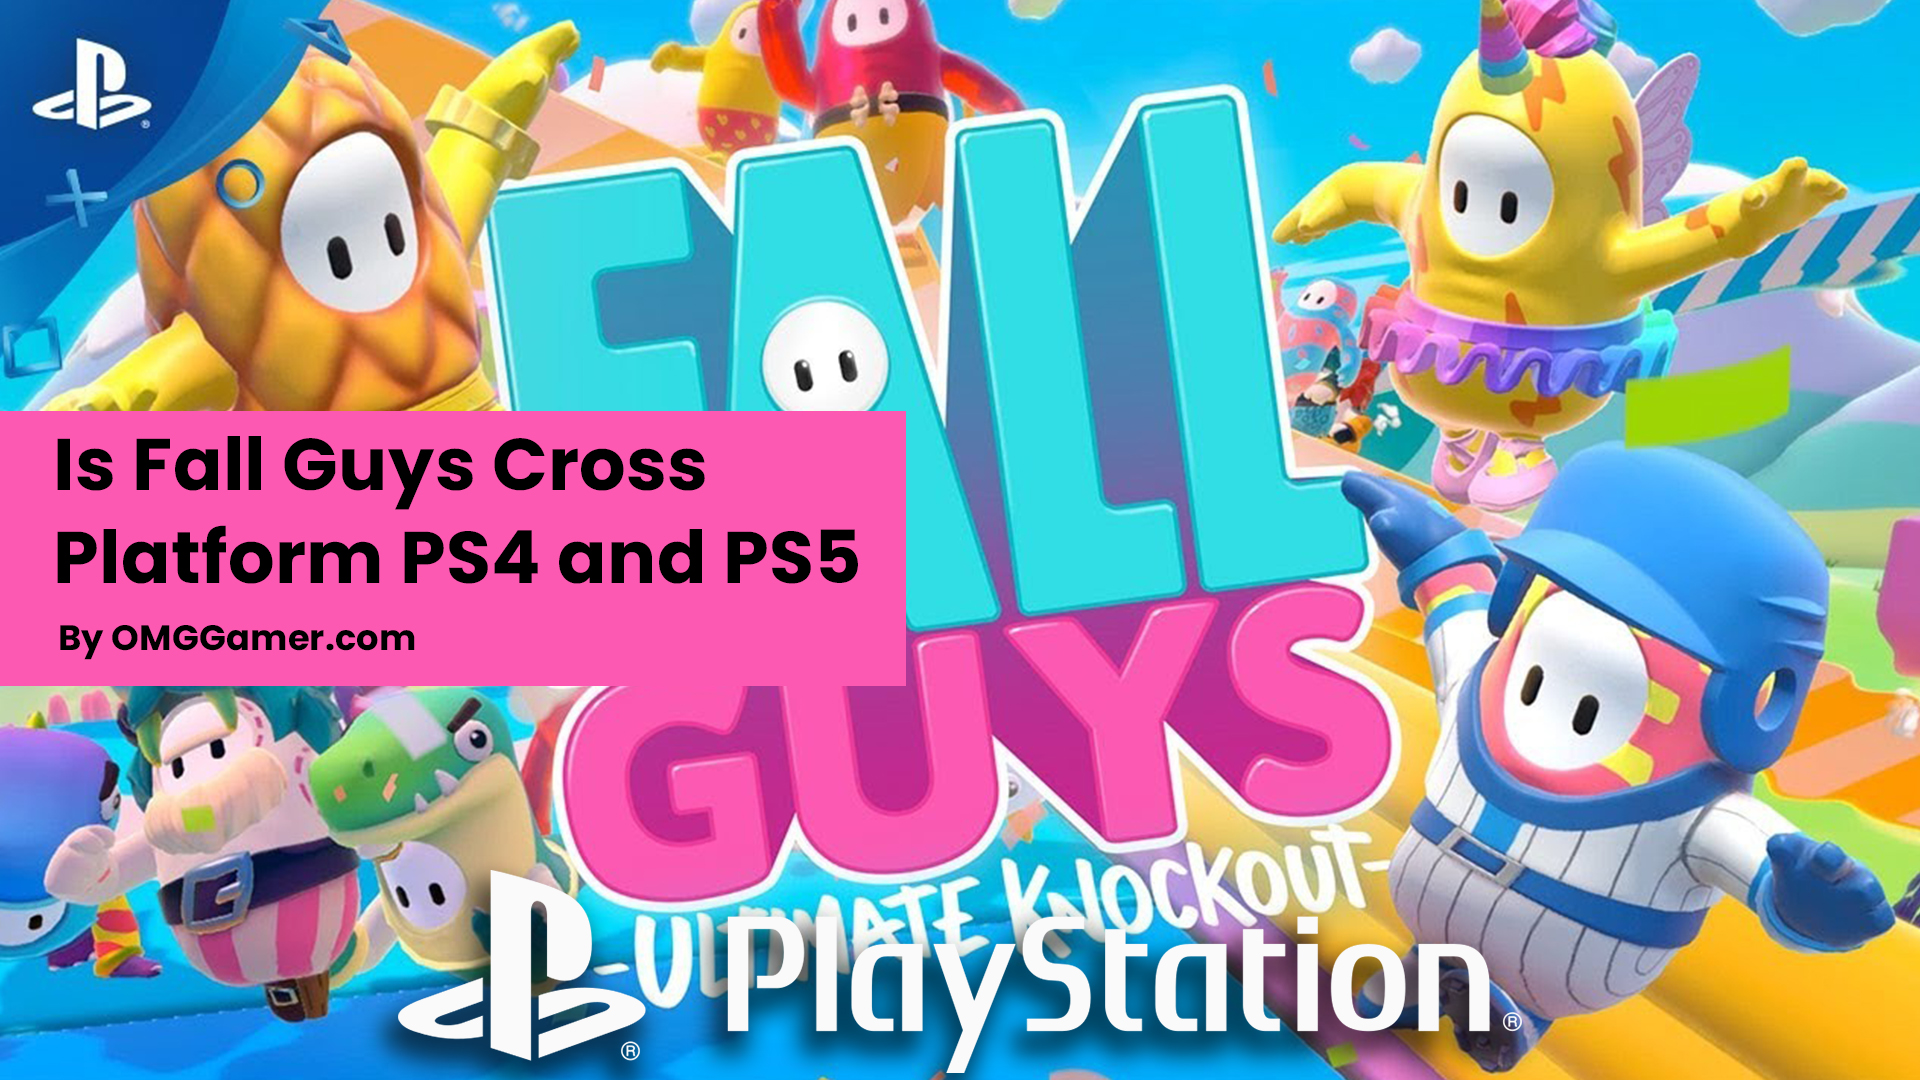 Is Fall Guys Cross Platform PS4 and PS5